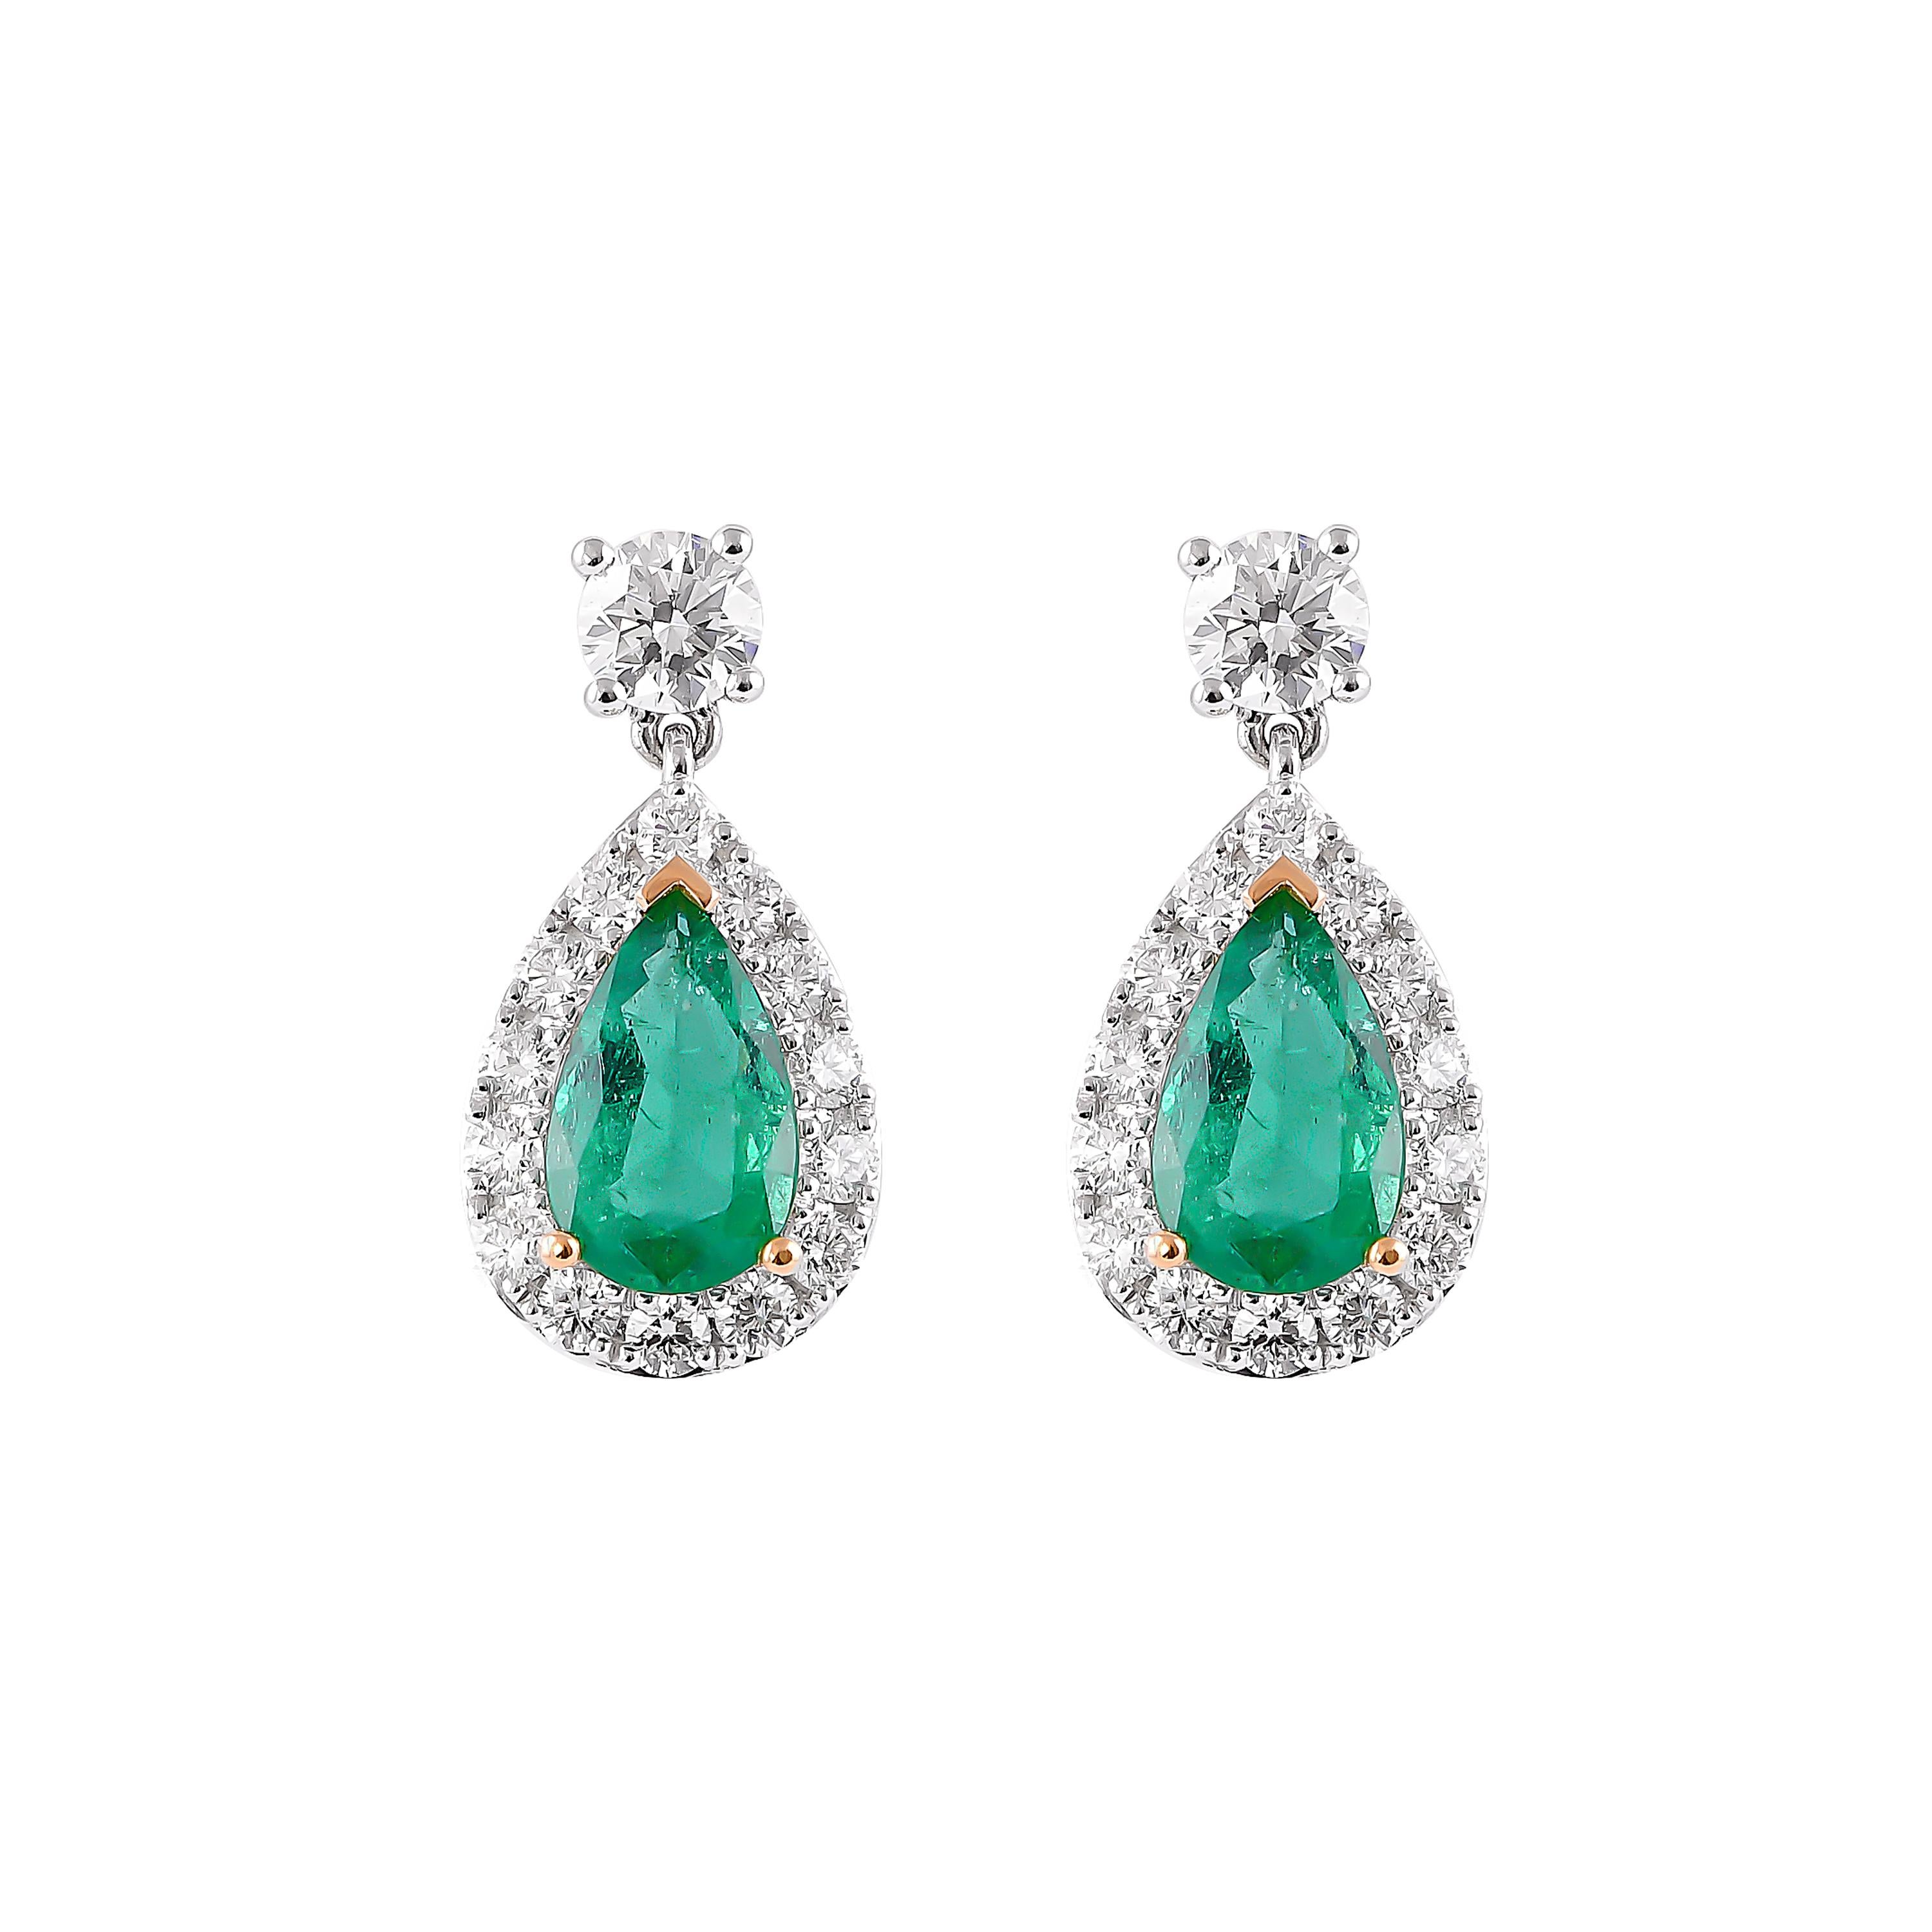 Contemporary 1.9 Carat Emerald and Diamond Earrings in 18 Karat White Gold For Sale